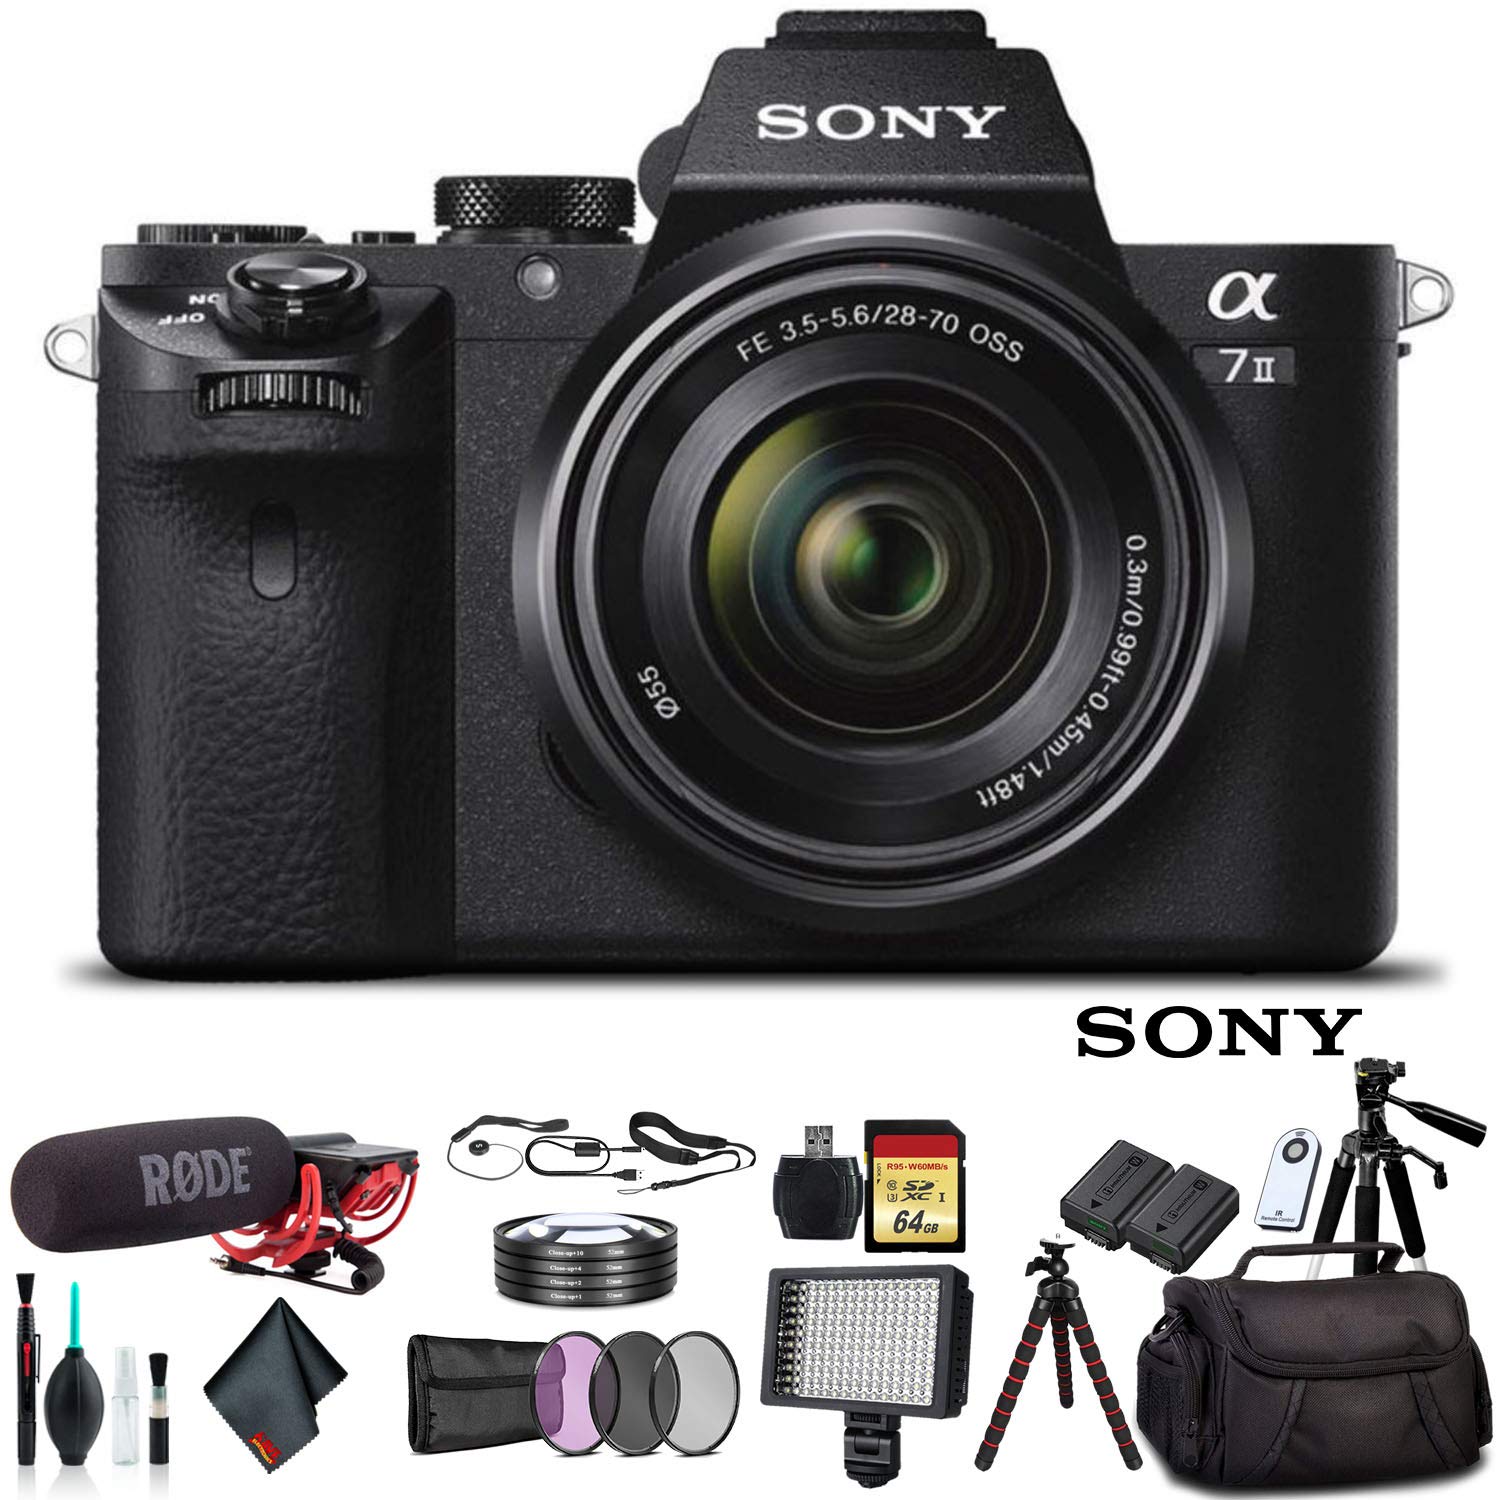 Sony Alpha a7 II Mirrorless Camera with FE 28-70mm f/3.5-5.6 OSS Lens ILCE7M2K/B With Bag, Additional Battery, Rode Mic, LED Light, 64GB Memory Card, Sling Soft Bag, , Plus Essential Accessories